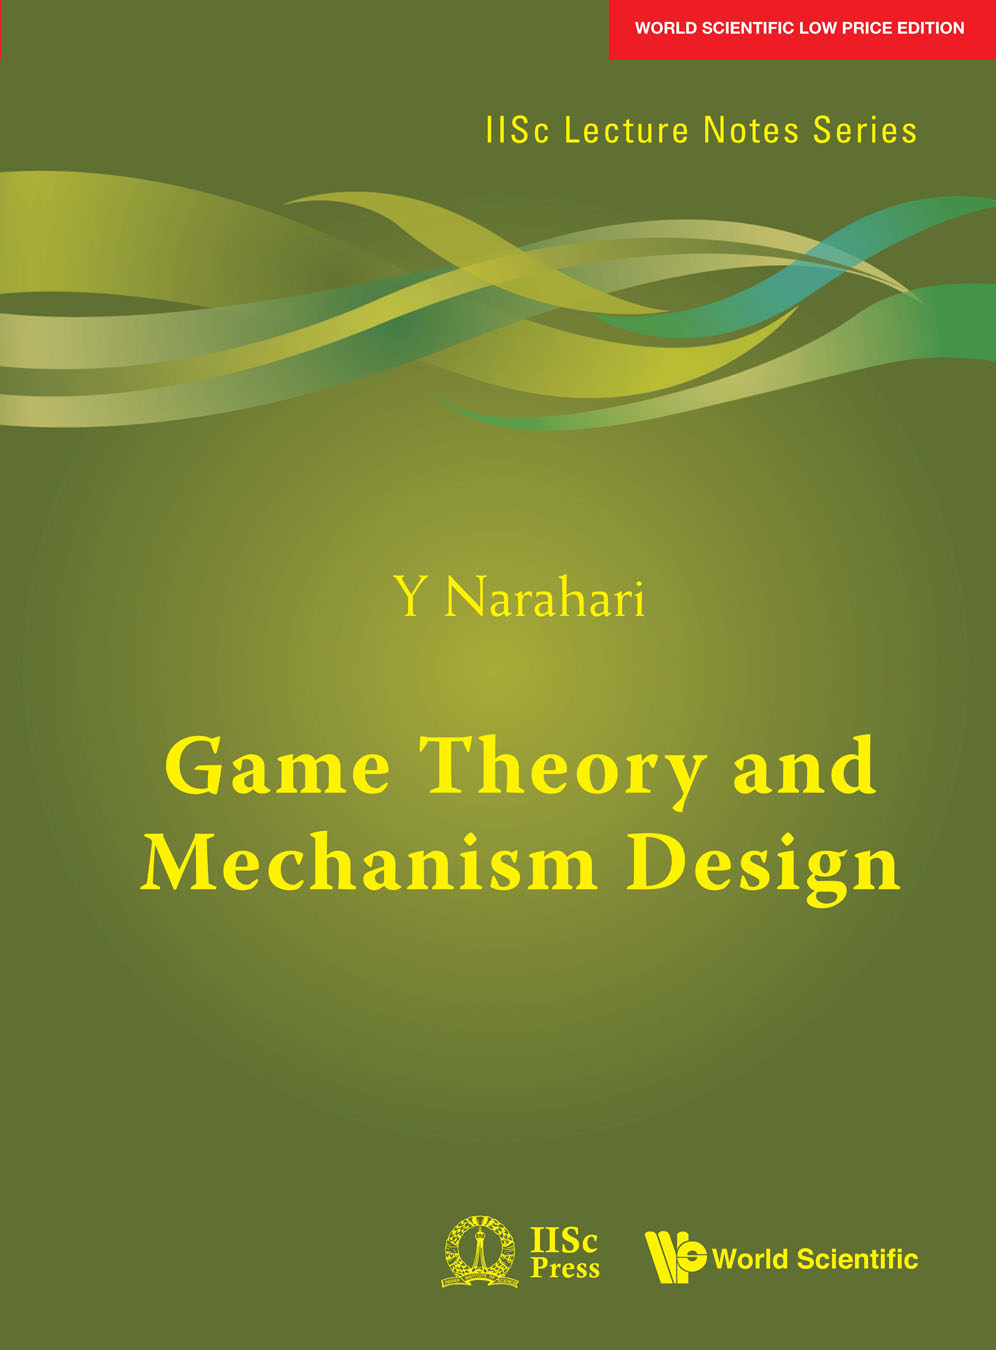 Game theory and mechanism design